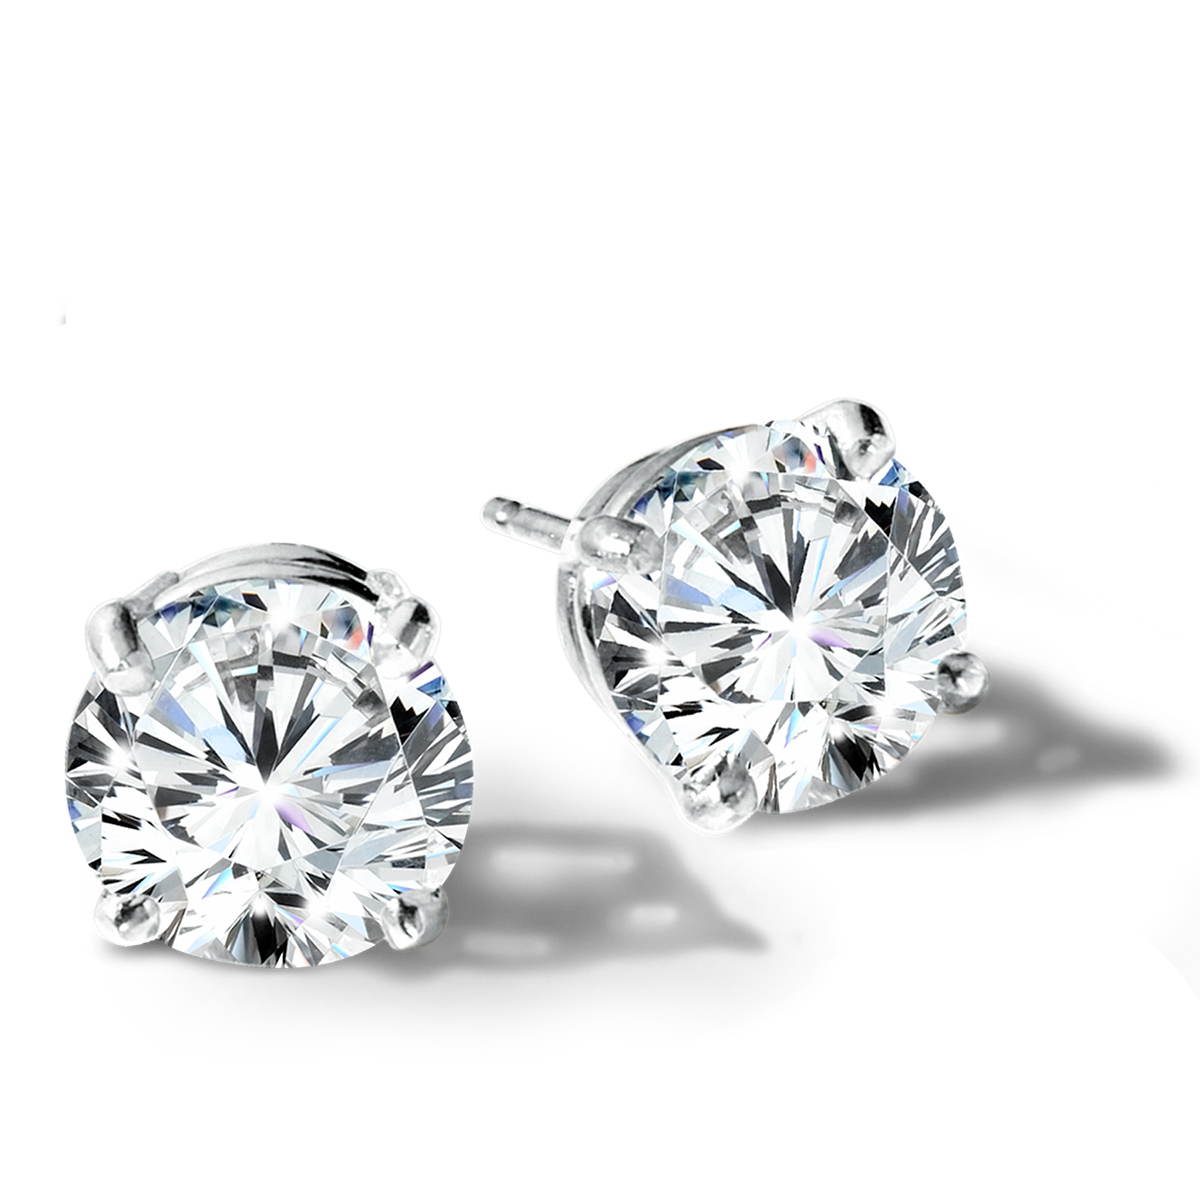 3ctw Lab Grown Round Diamond Solitaire Earrings